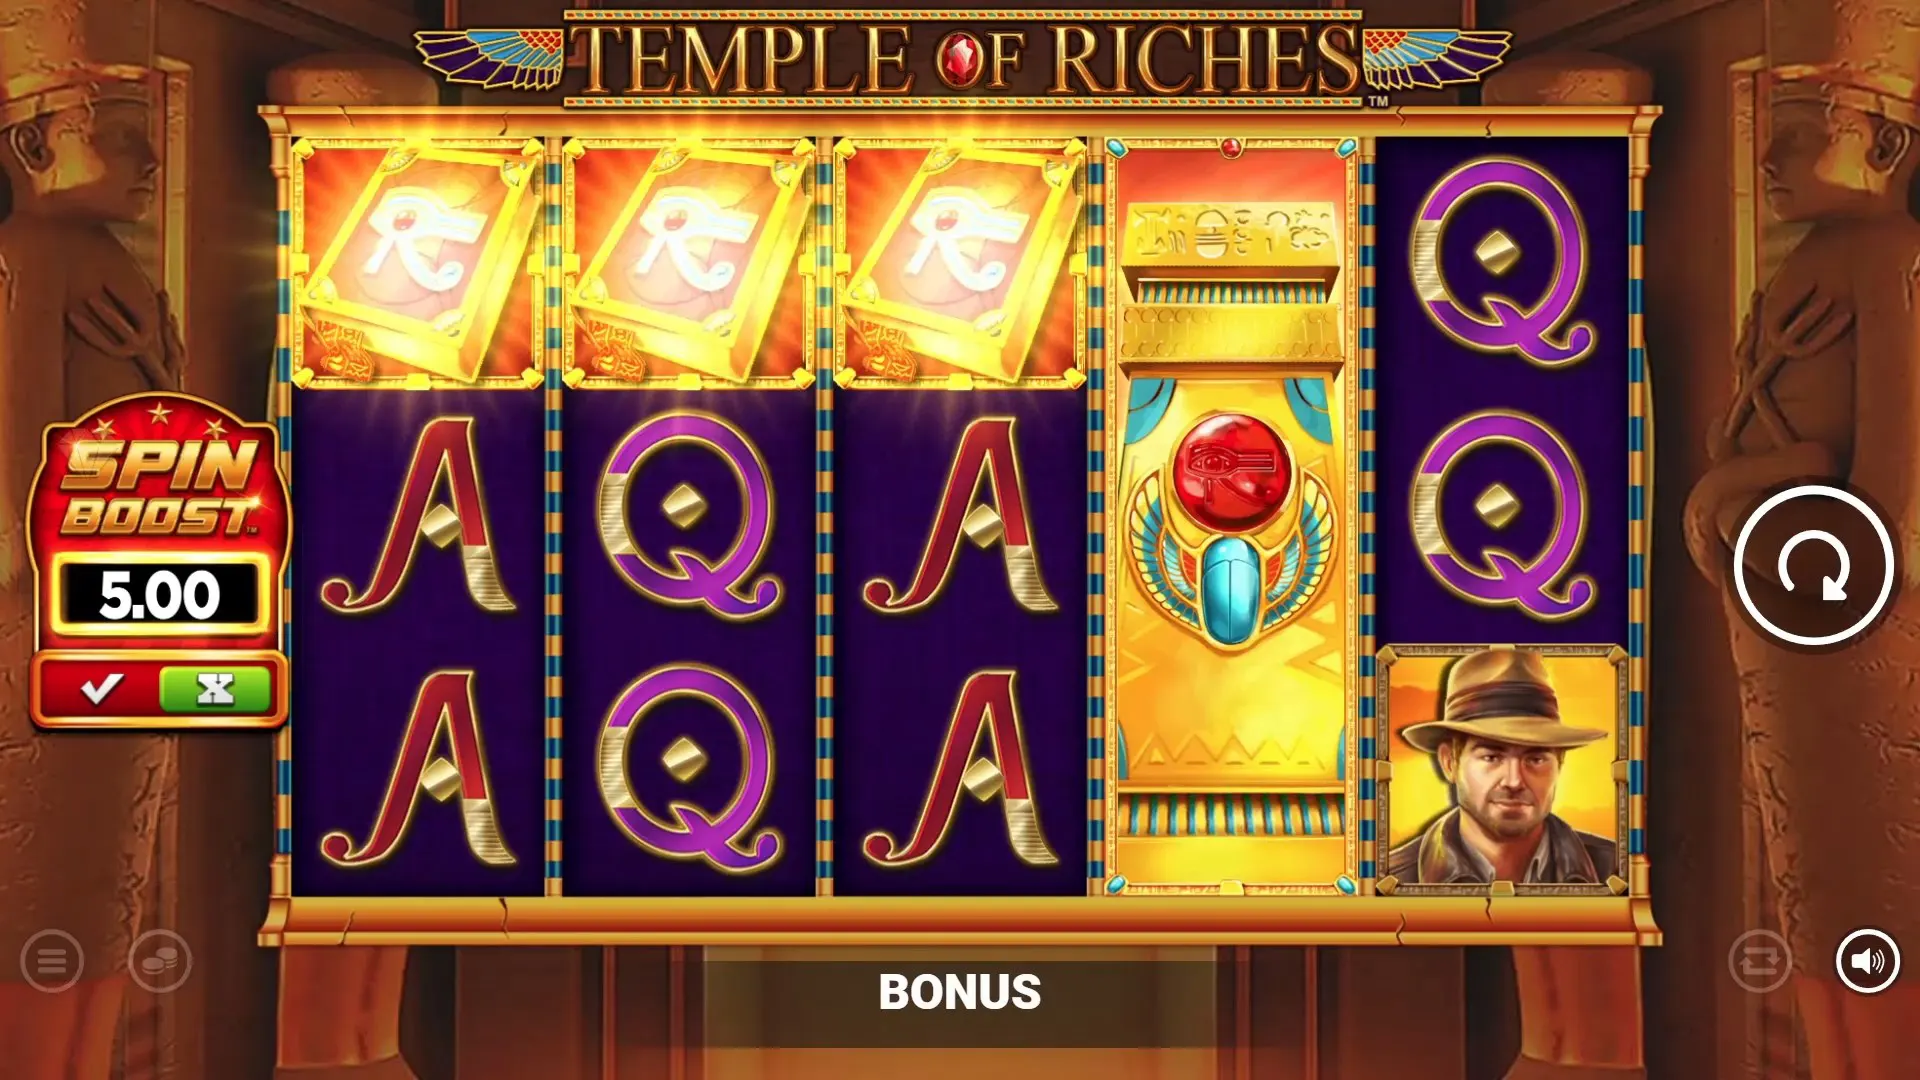 Temple of Riches Spin Boost demo